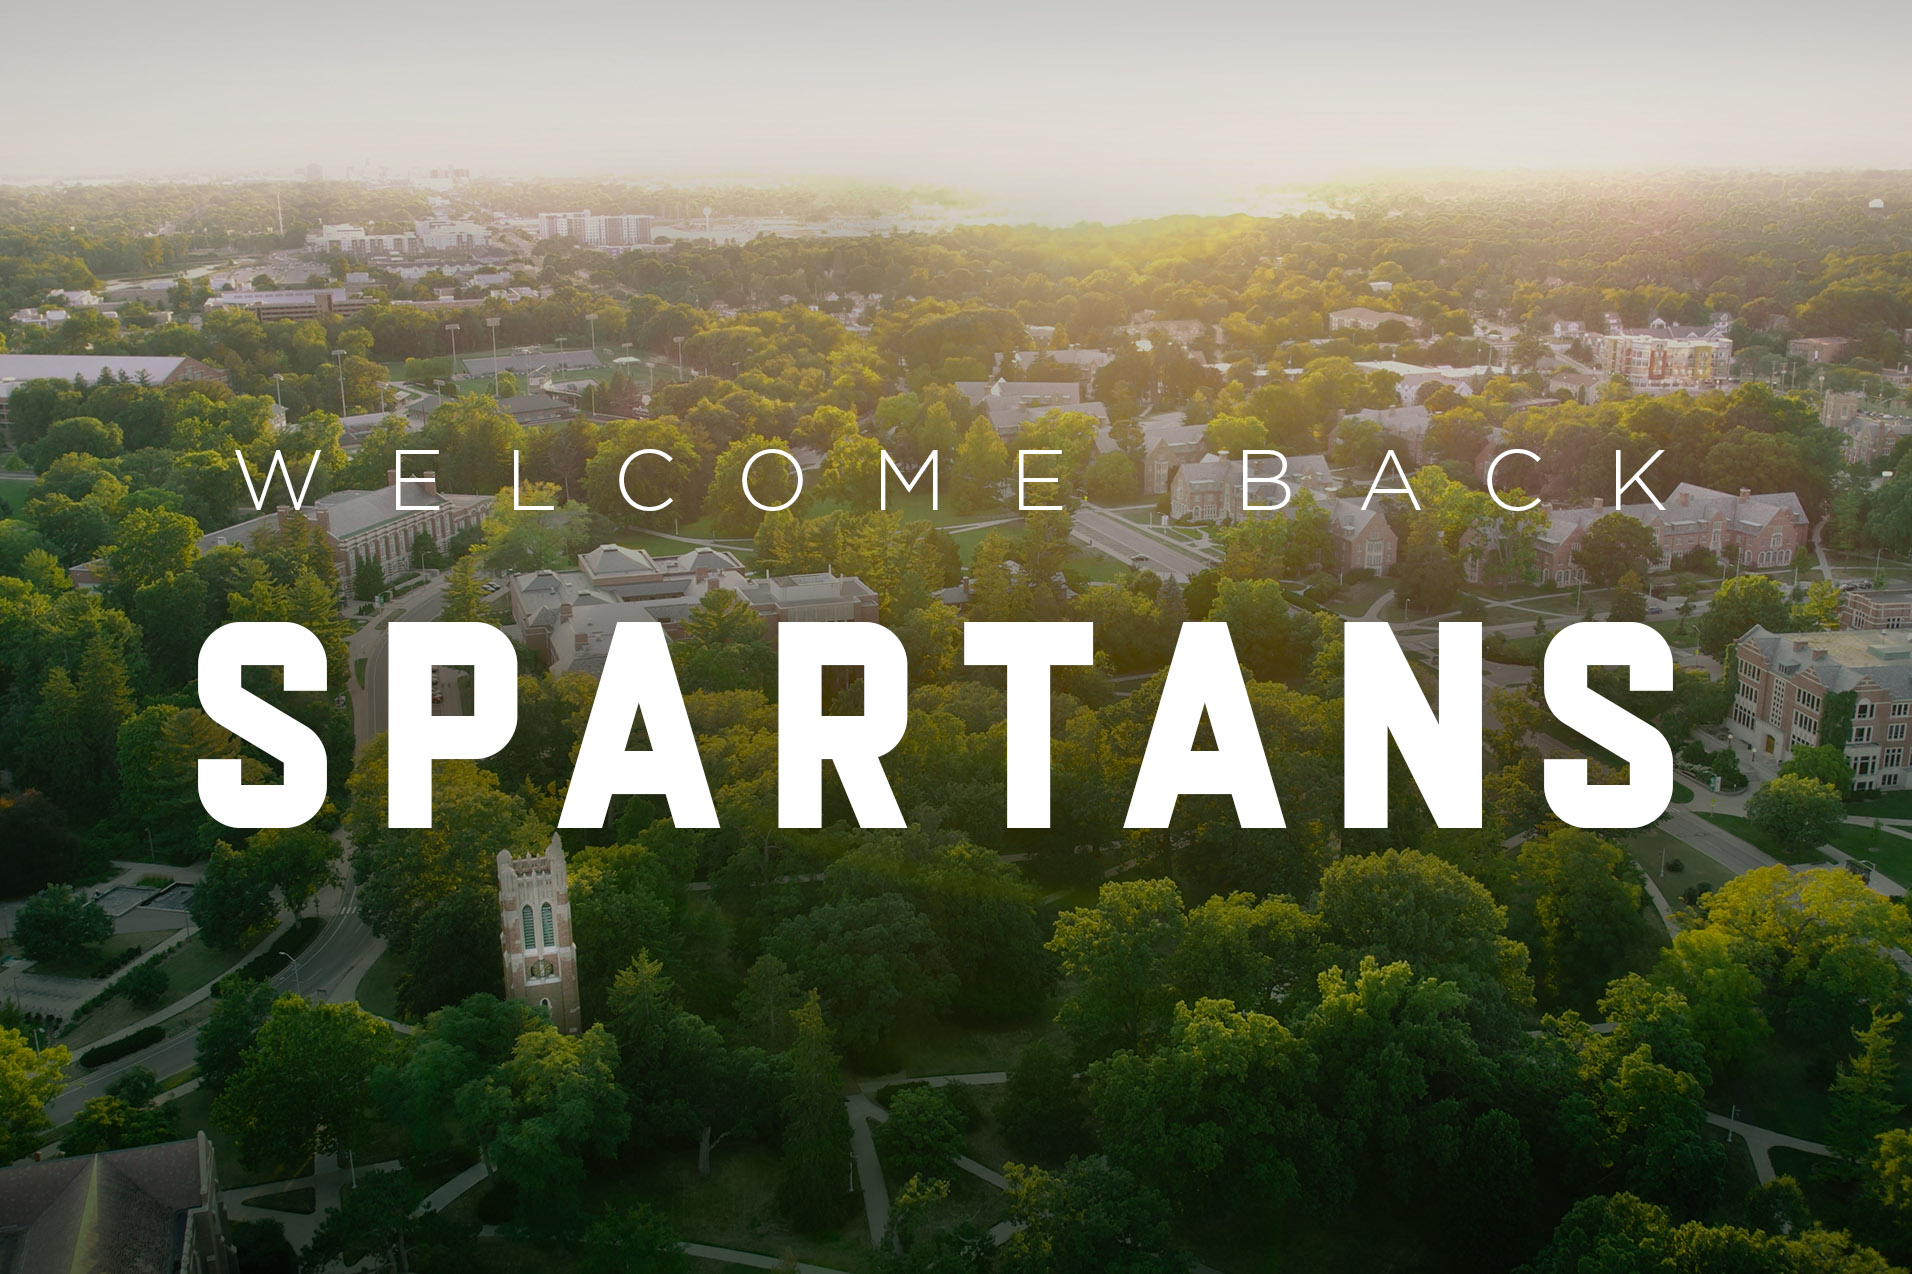 "Welcome Back Spartans" over an image of MSU campus